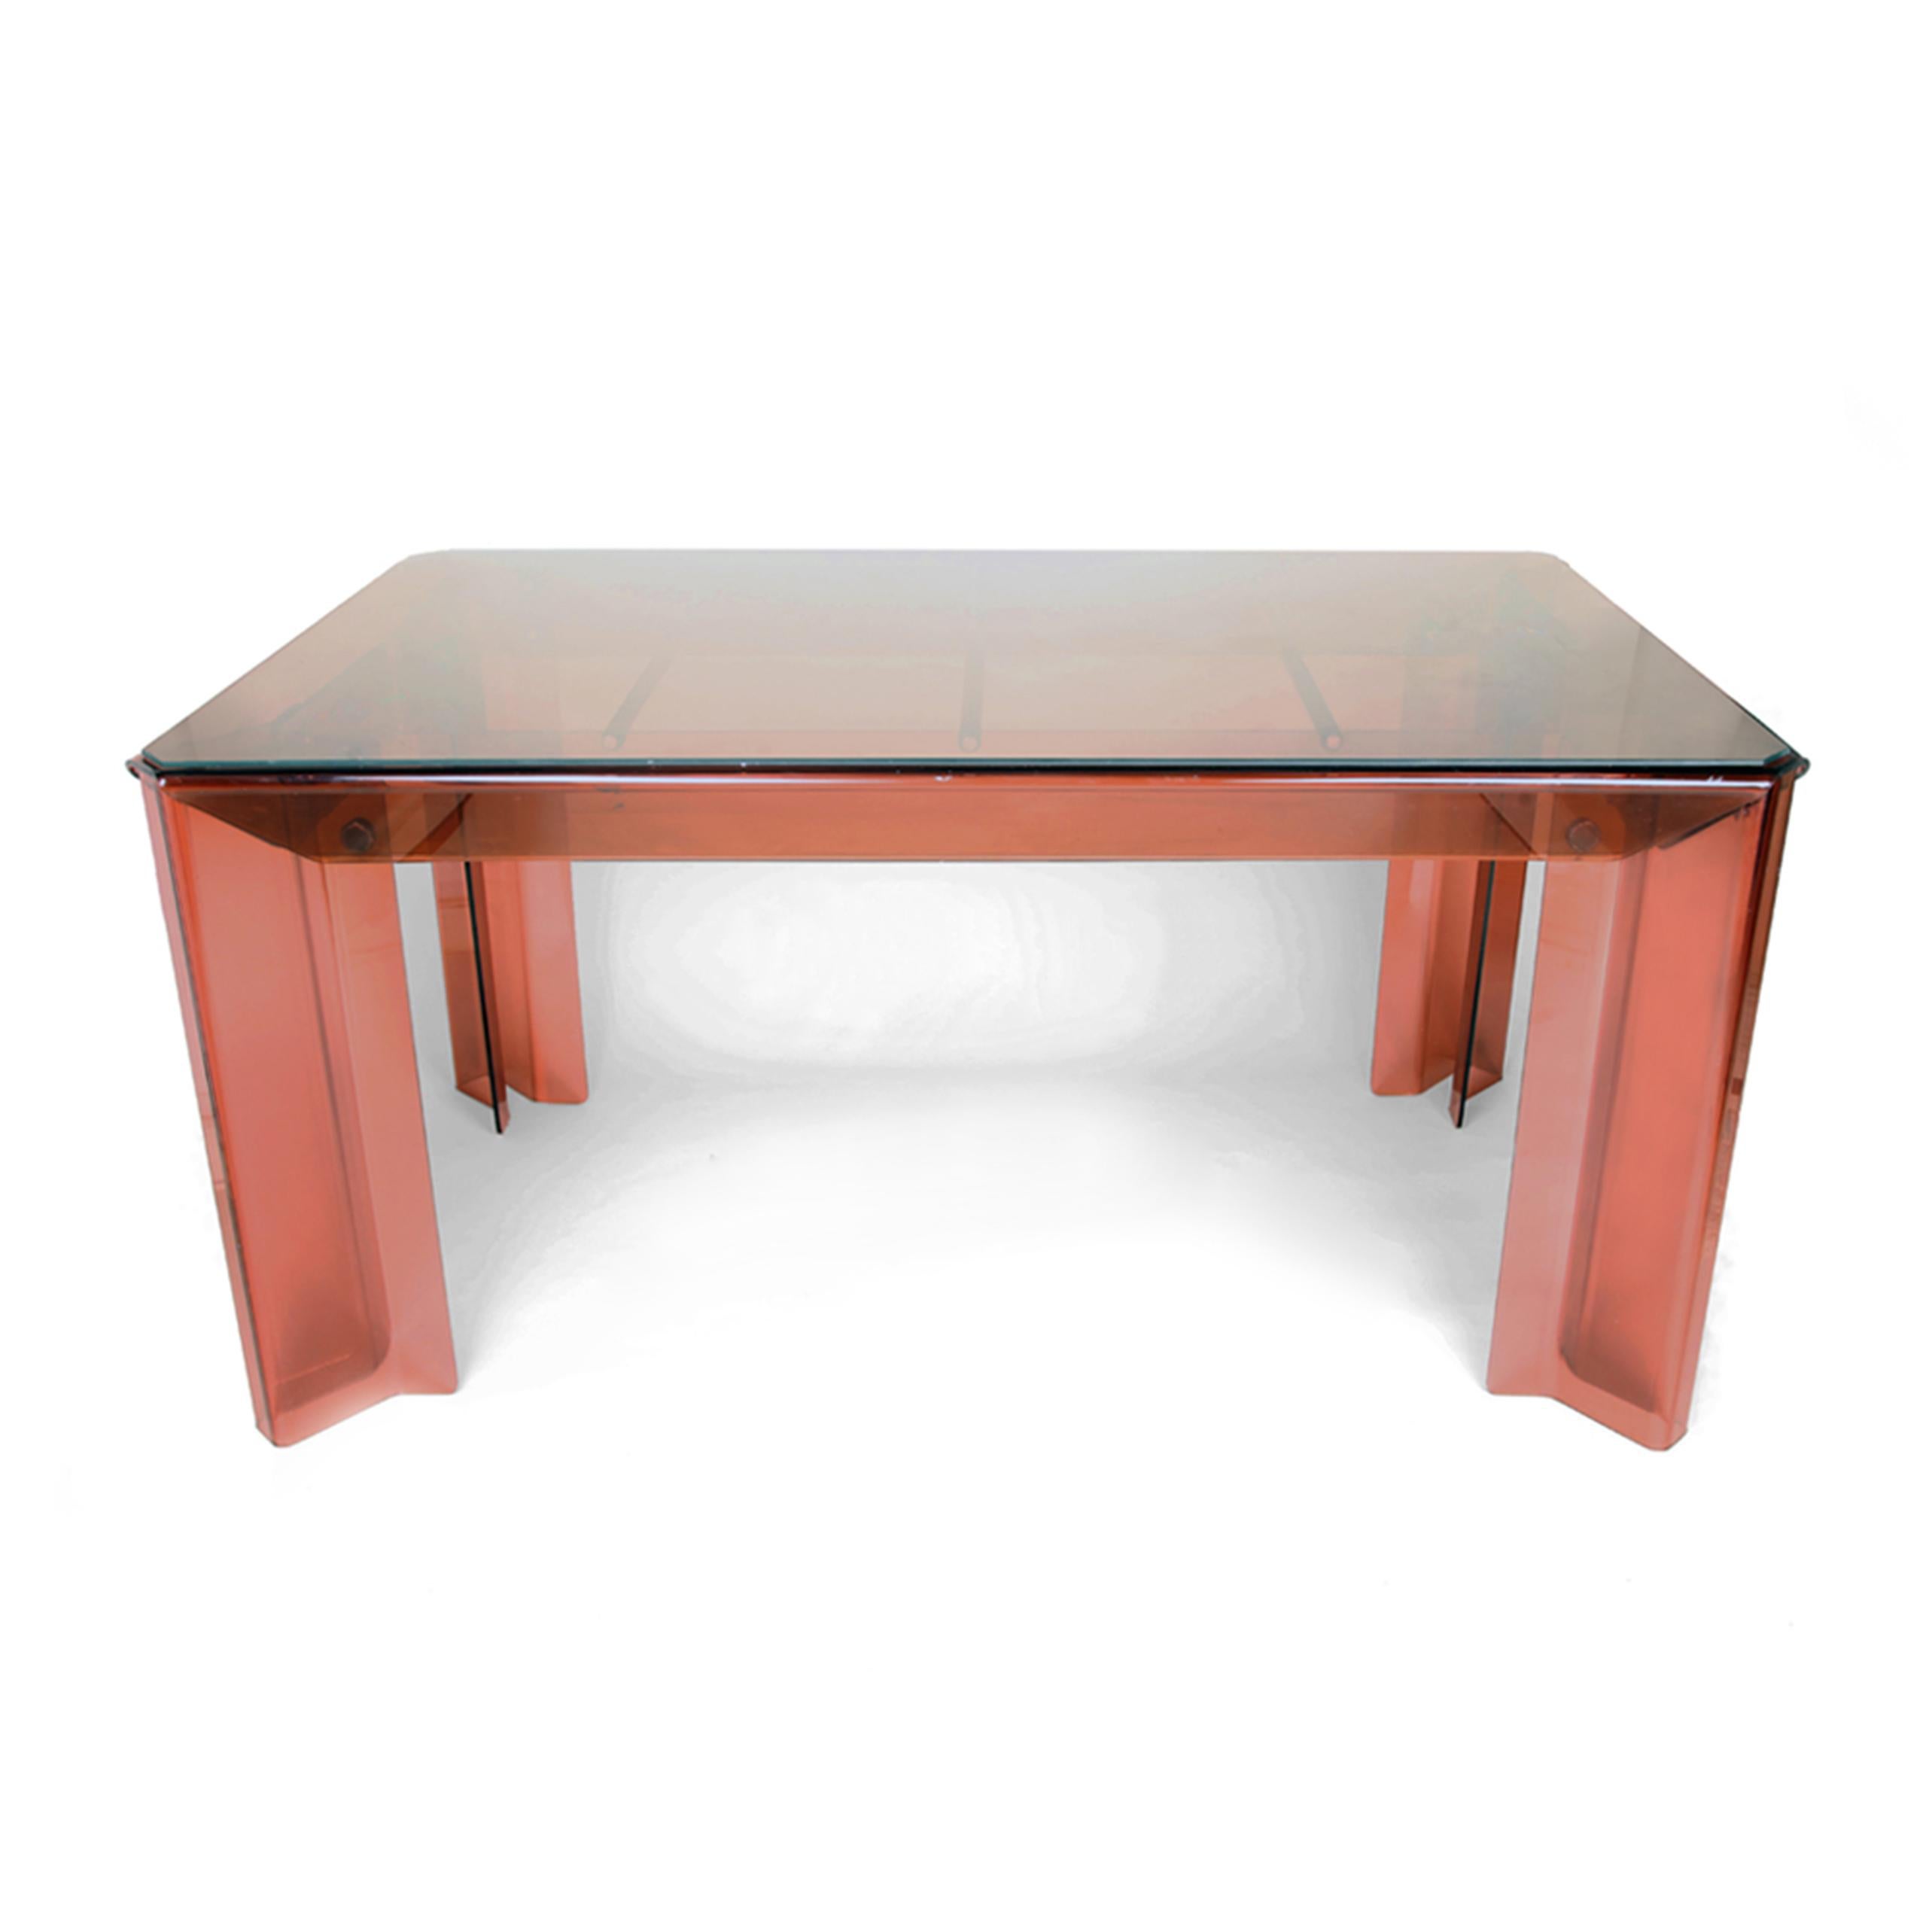 Unique dining table and four chairs in smoked perspex with chrome and orange perspex fittings. Very modern design, the table has a glass top and the chairs originally had velvet cushions. Replacement cushions upon request. 
This dining set